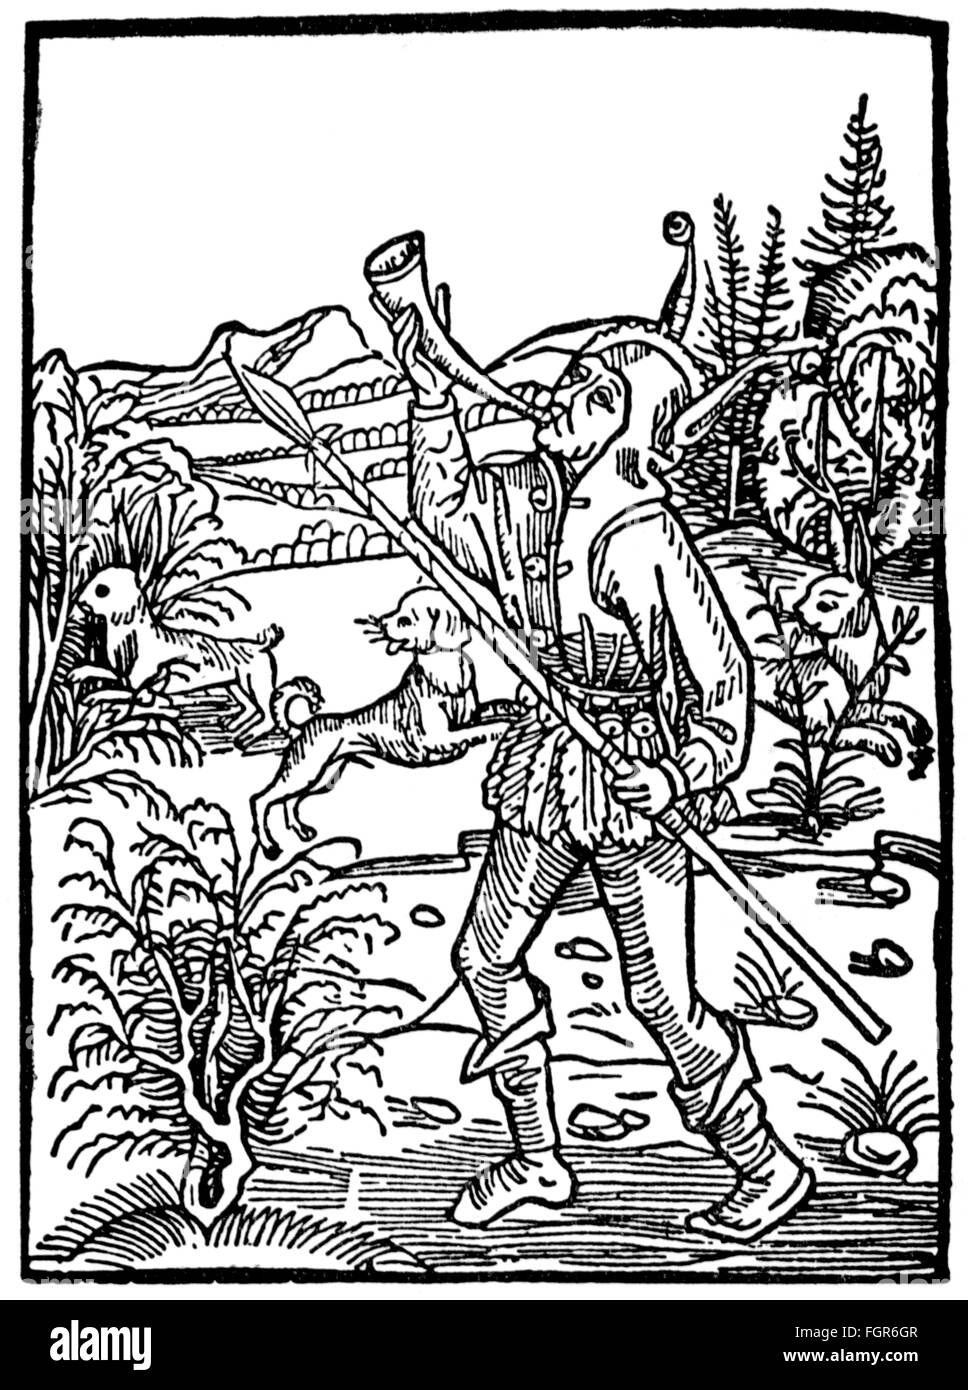 hunt, satire, 'Of Useless Hunting', woodcut, 'Ship of Fools' by Sebastian Brant, Basel, 1494, Additional-Rights-Clearences-Not Available Stock Photo